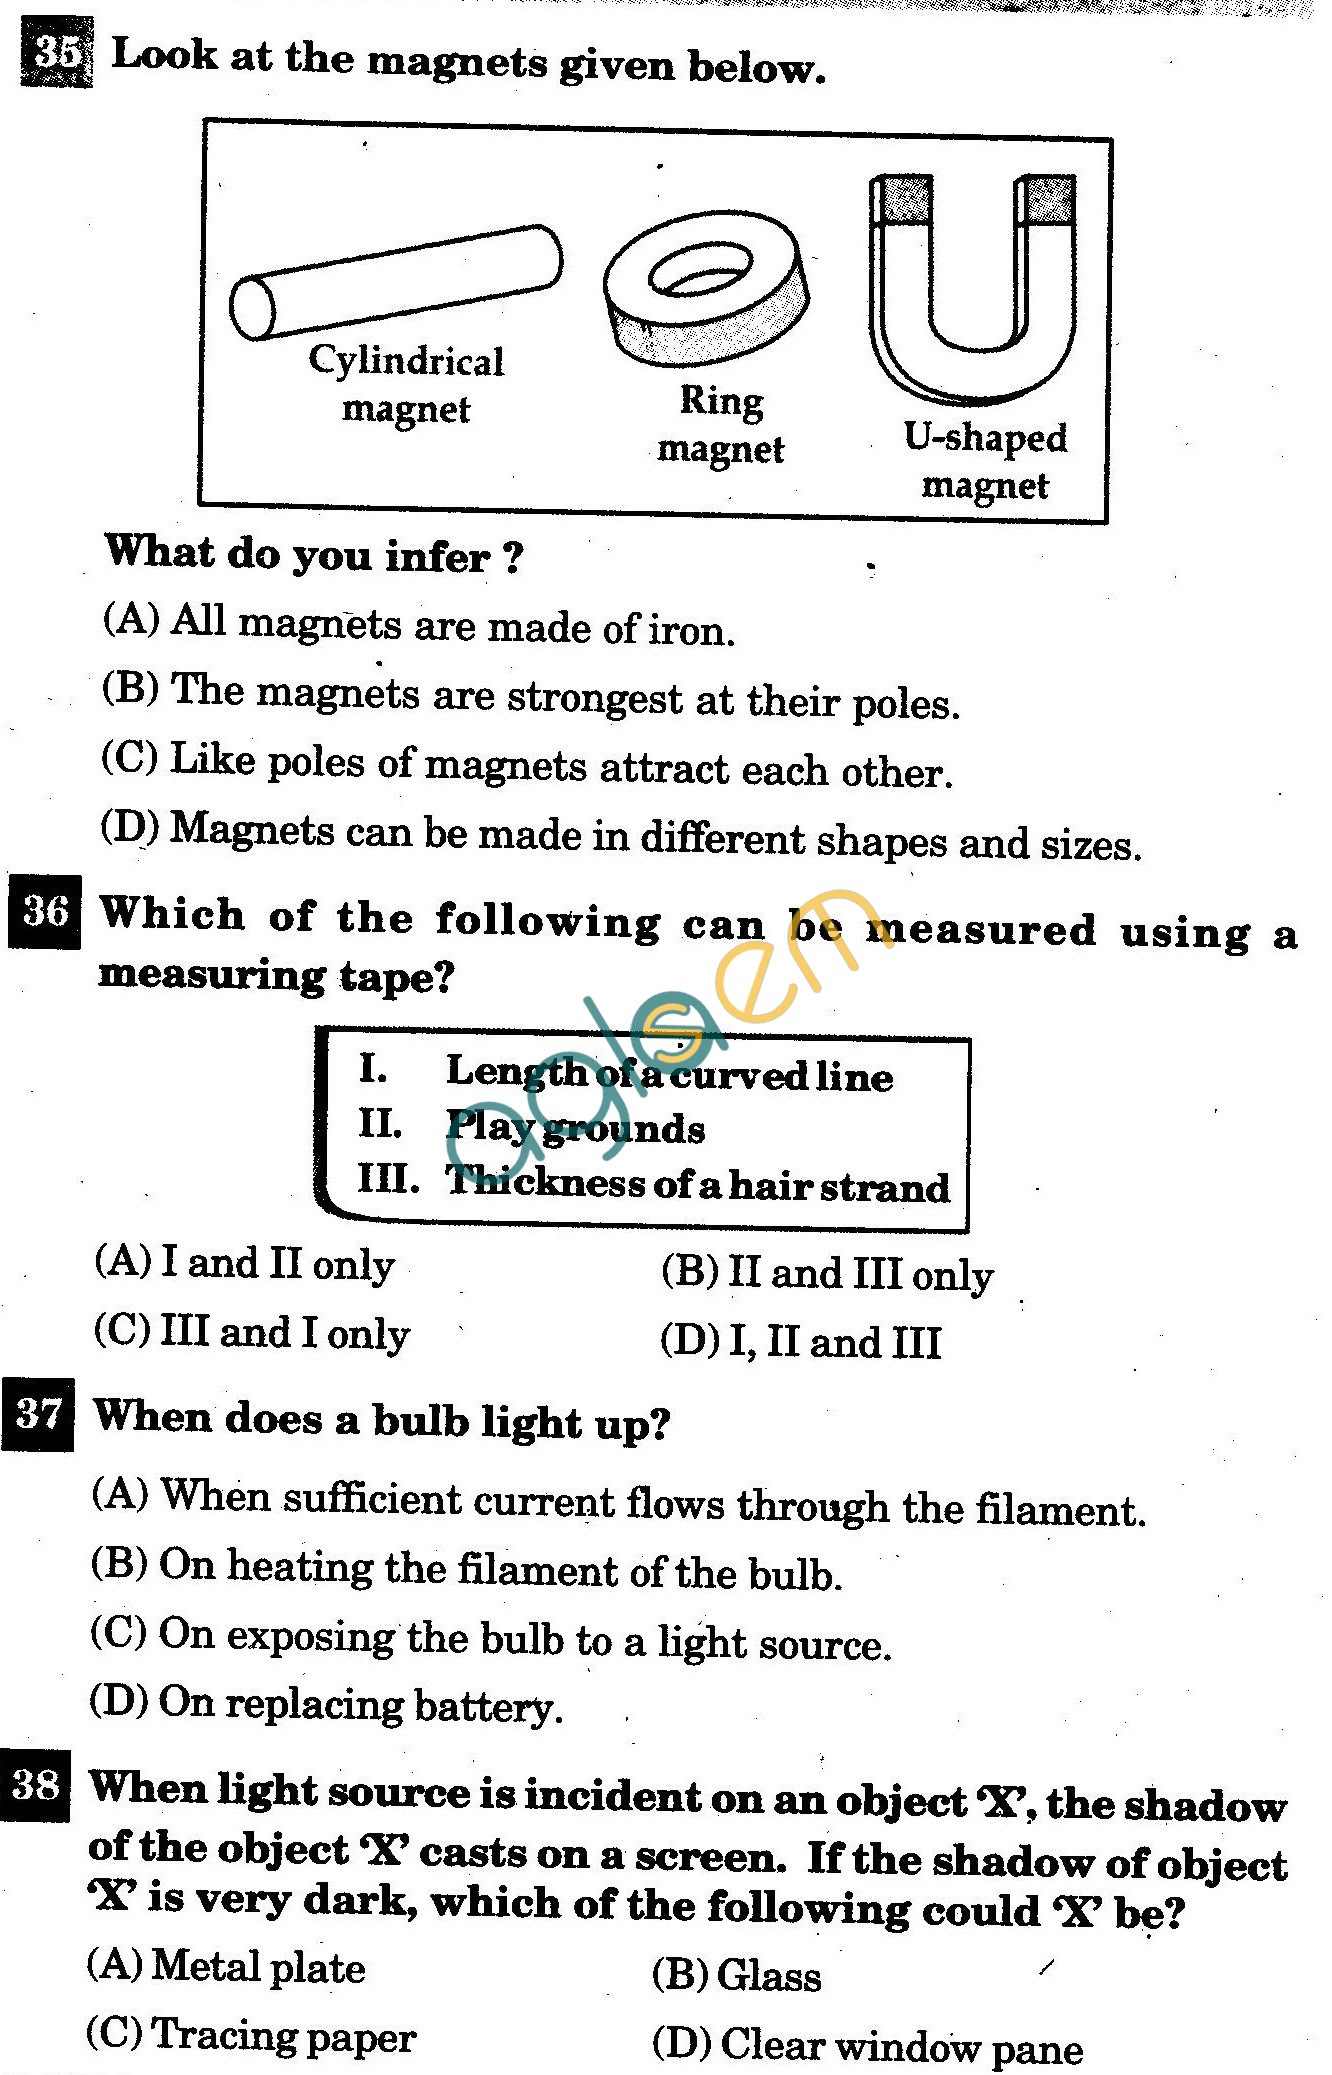 NSTSE 2011: Class VI Question Paper with Answers - Physics